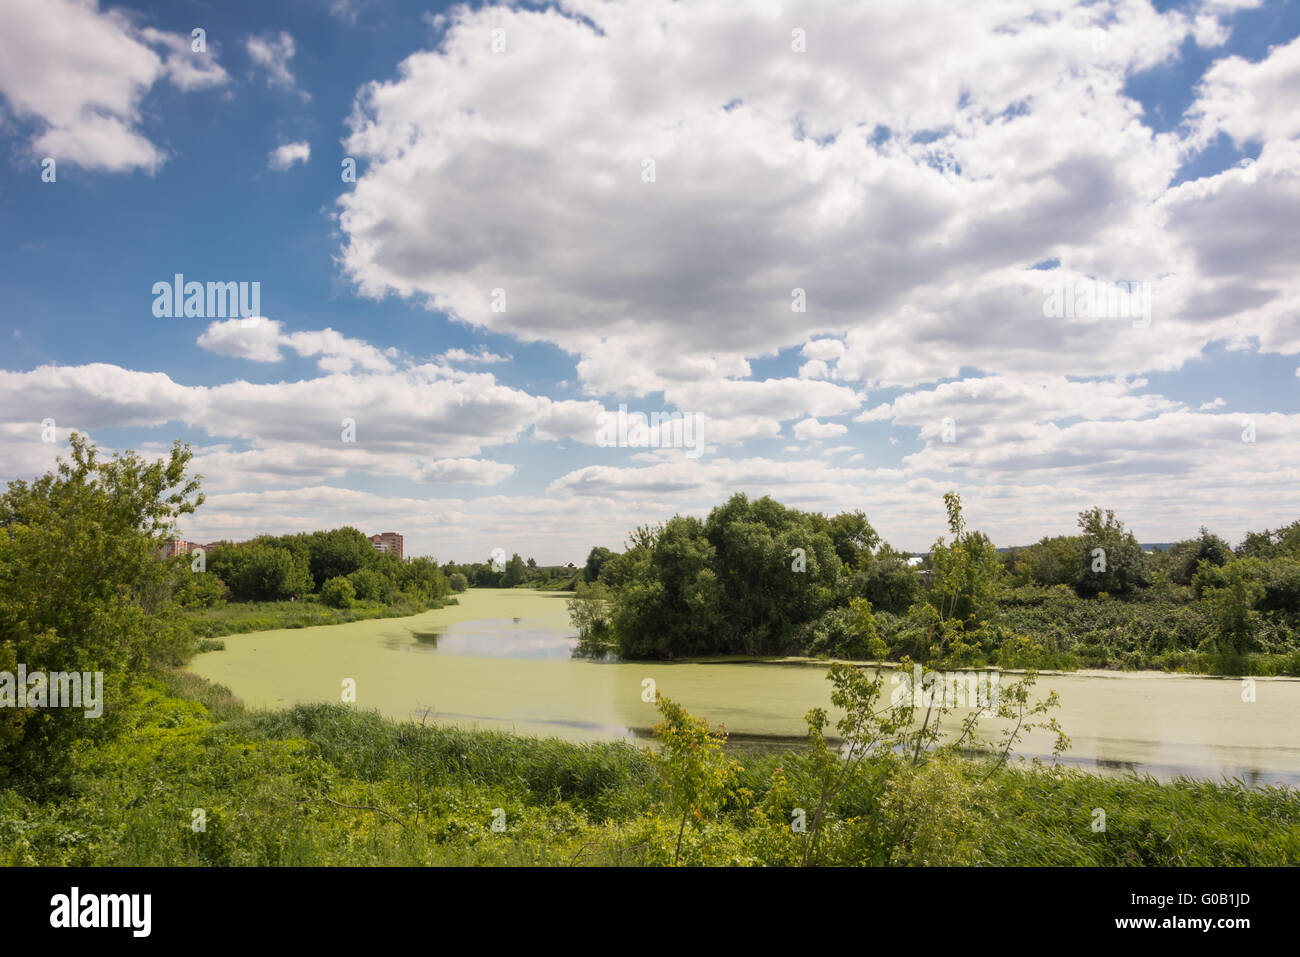 Suburban landscape with river and blue sky Stock Photo